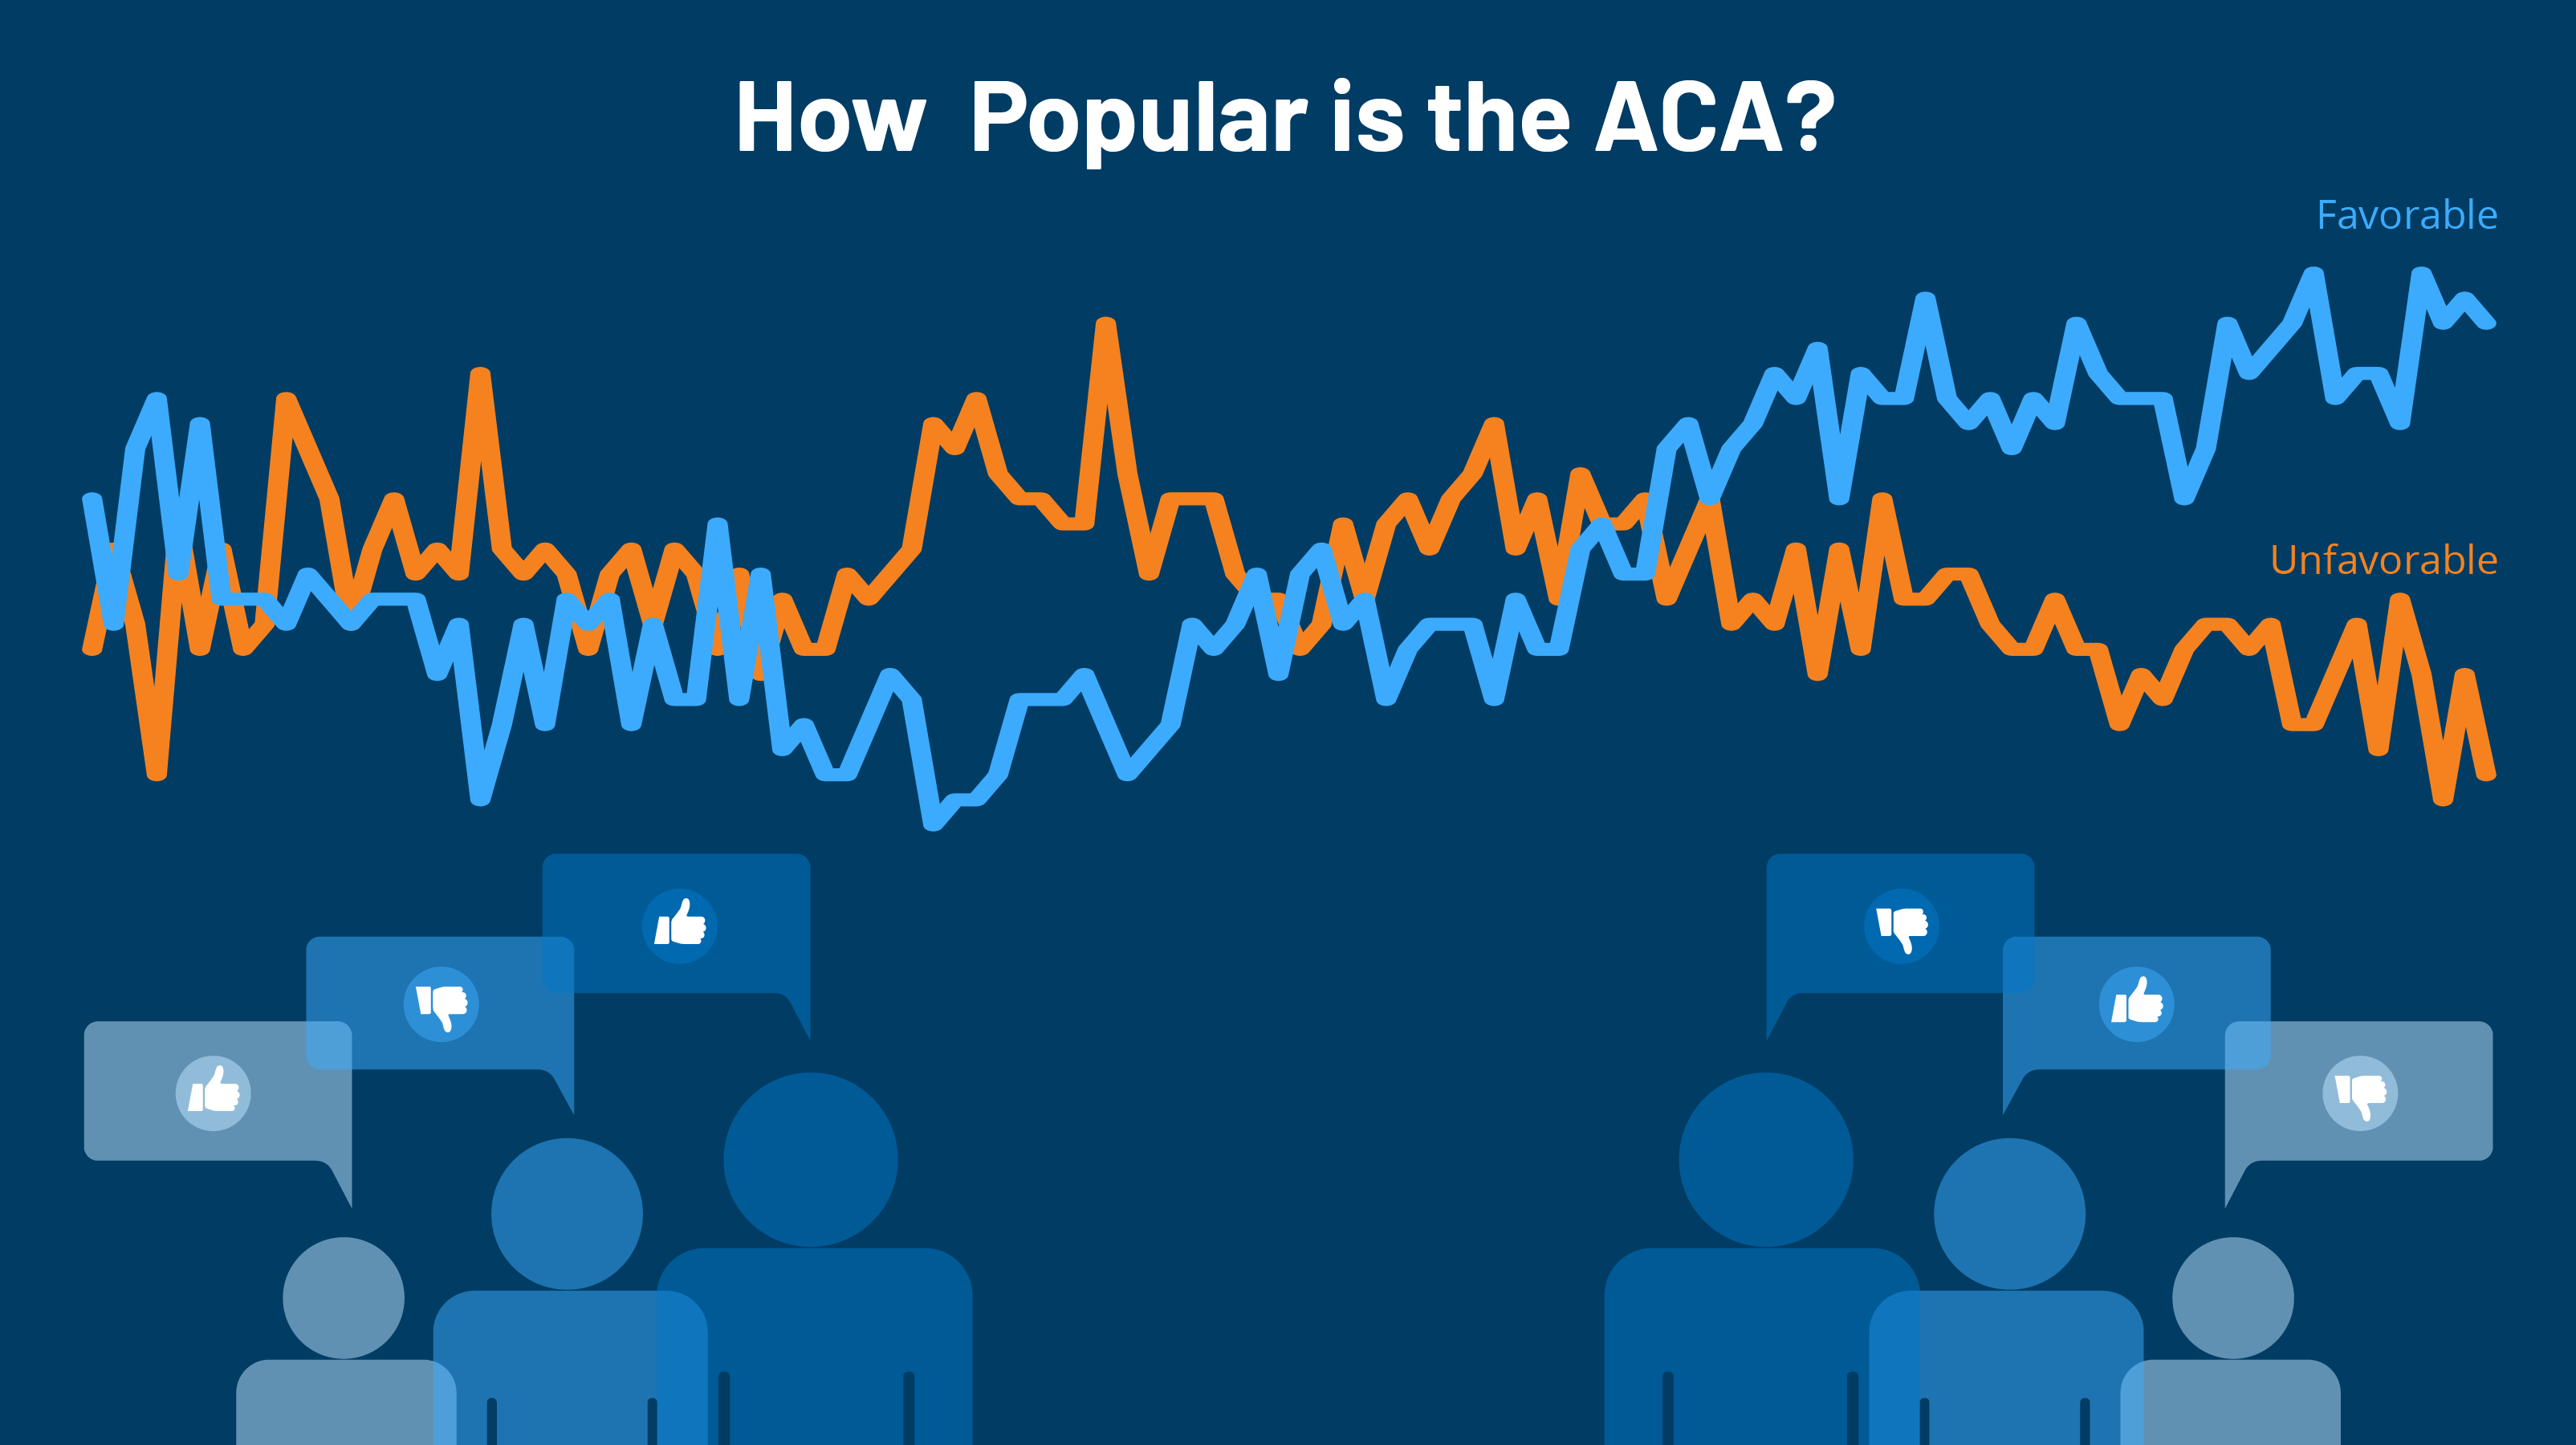 KFF Health Tracking Poll: The Public's Views on the ACA